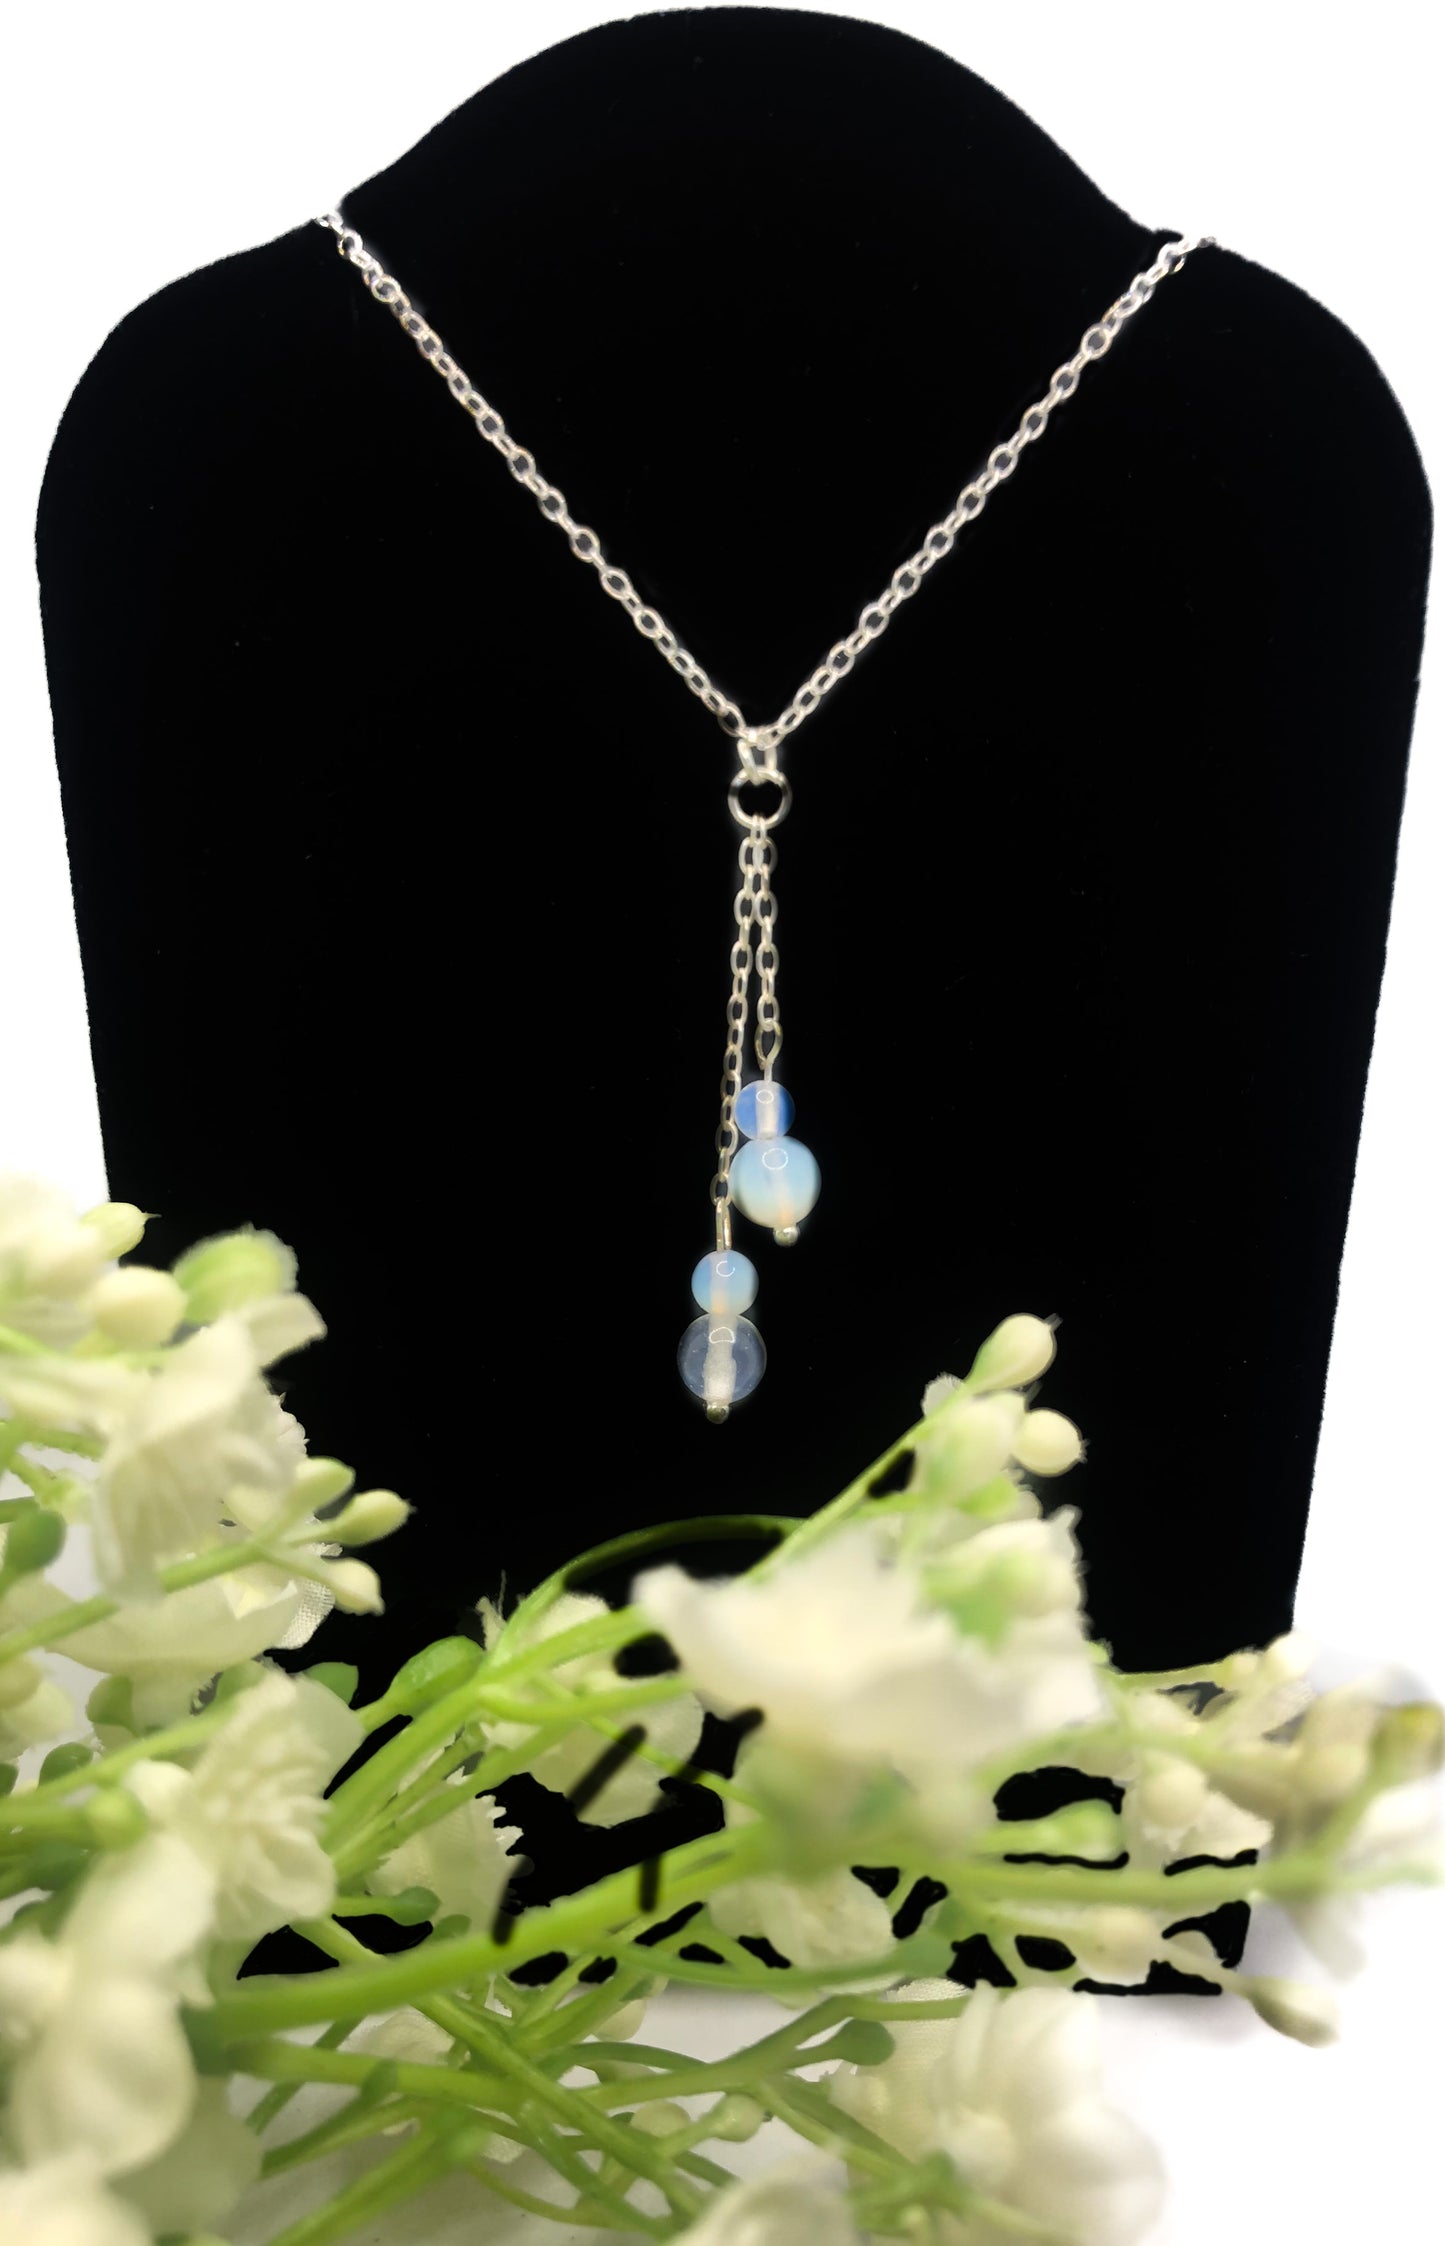 Gemstone and Silver chain drop necklace